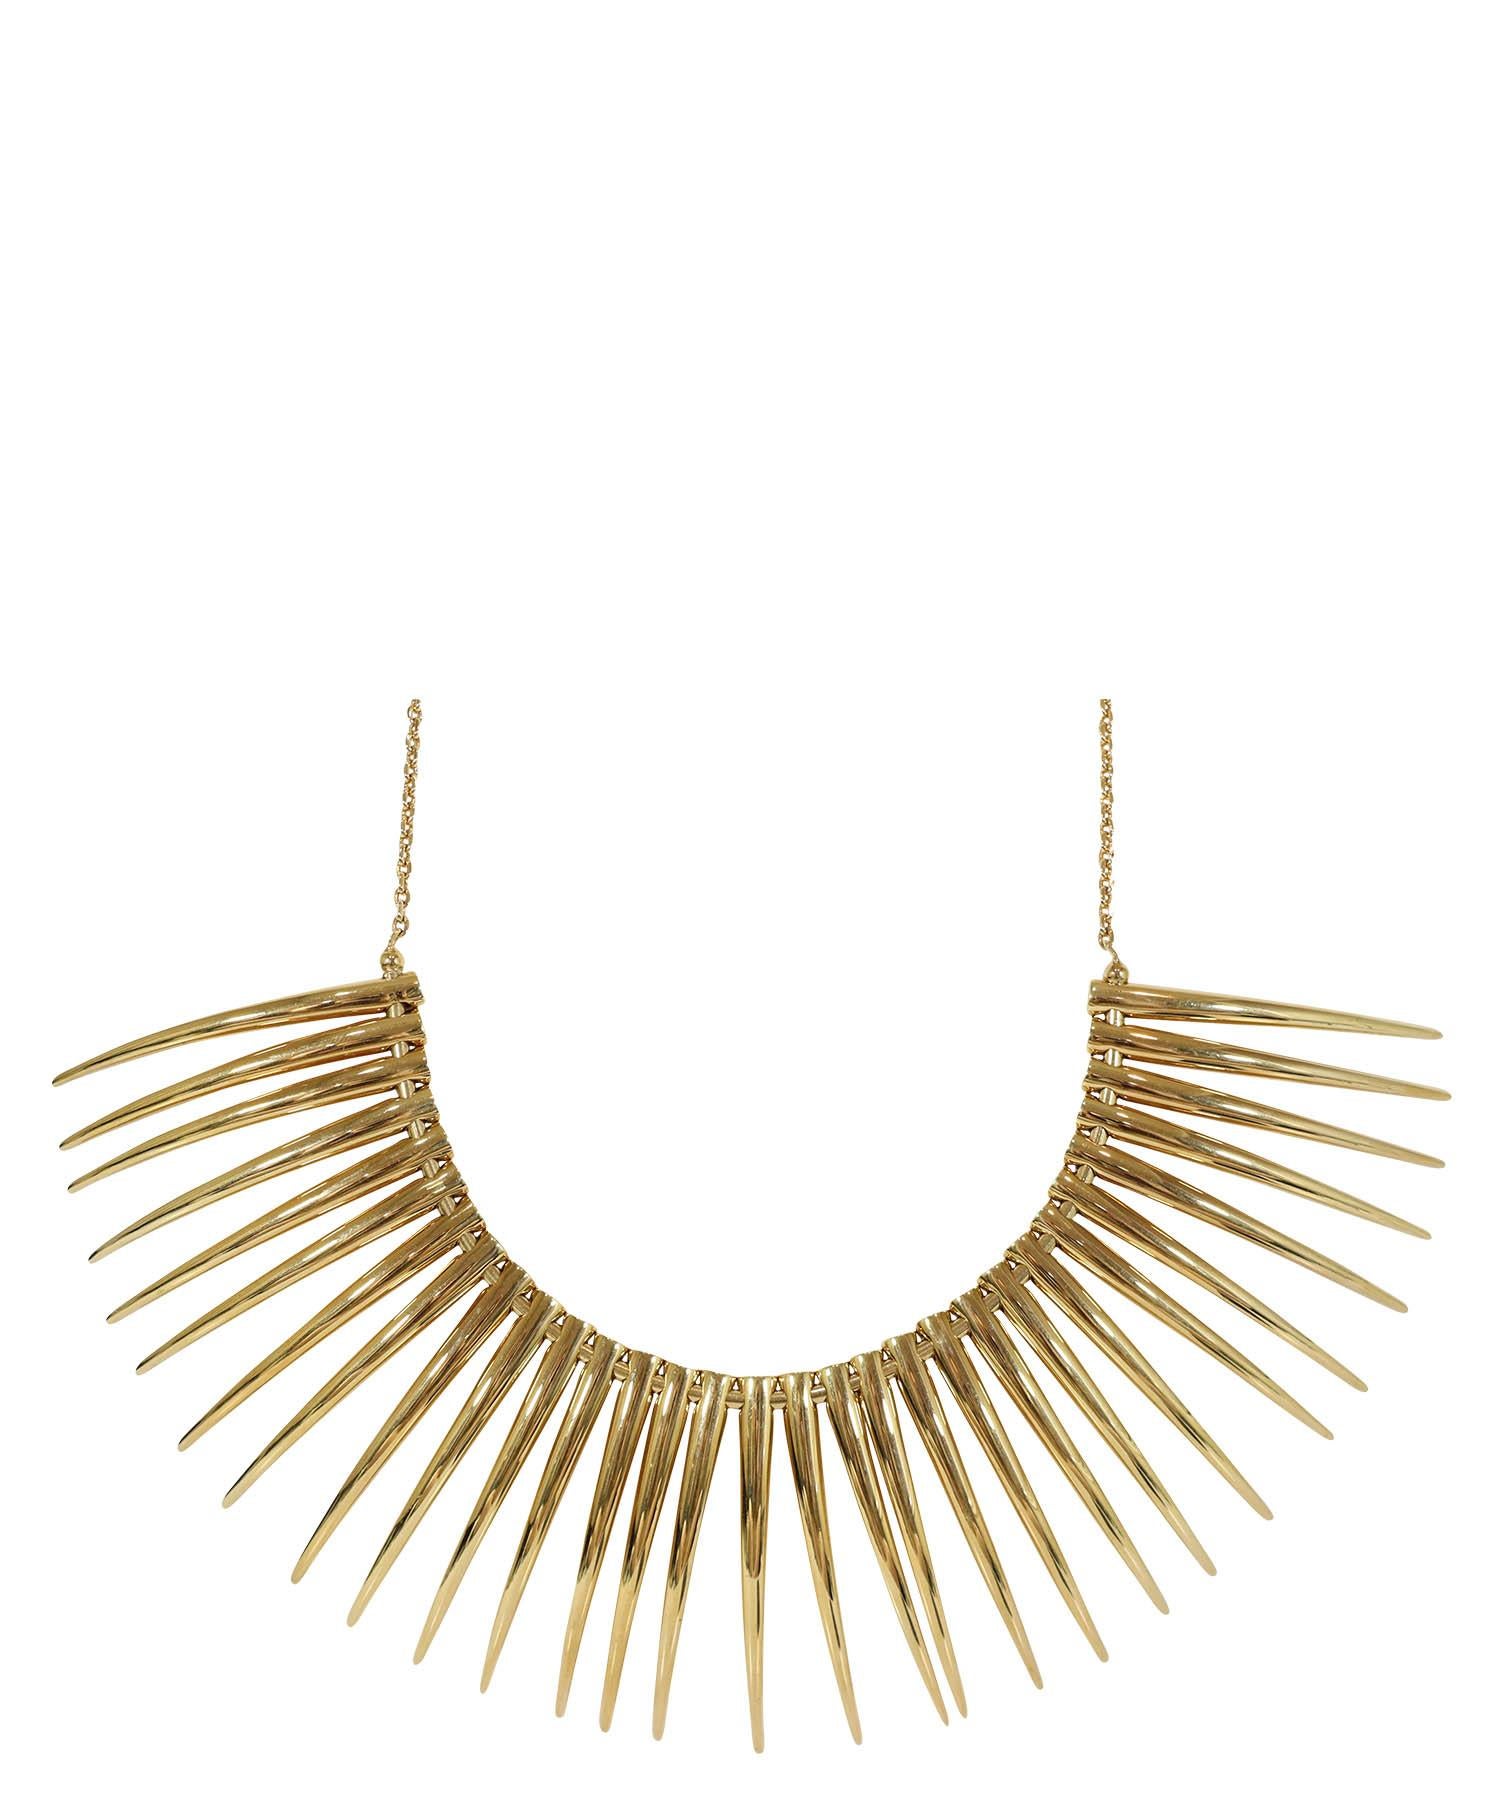 Alexander McQueen necklace, designed by Shaun Leane. Necklace has 31 long yellow gold vermeil polished quills strung on a formed gold bar. Each quil moved independently. Bar is on a matching chain with a lobster claw fastening and an engraved logo